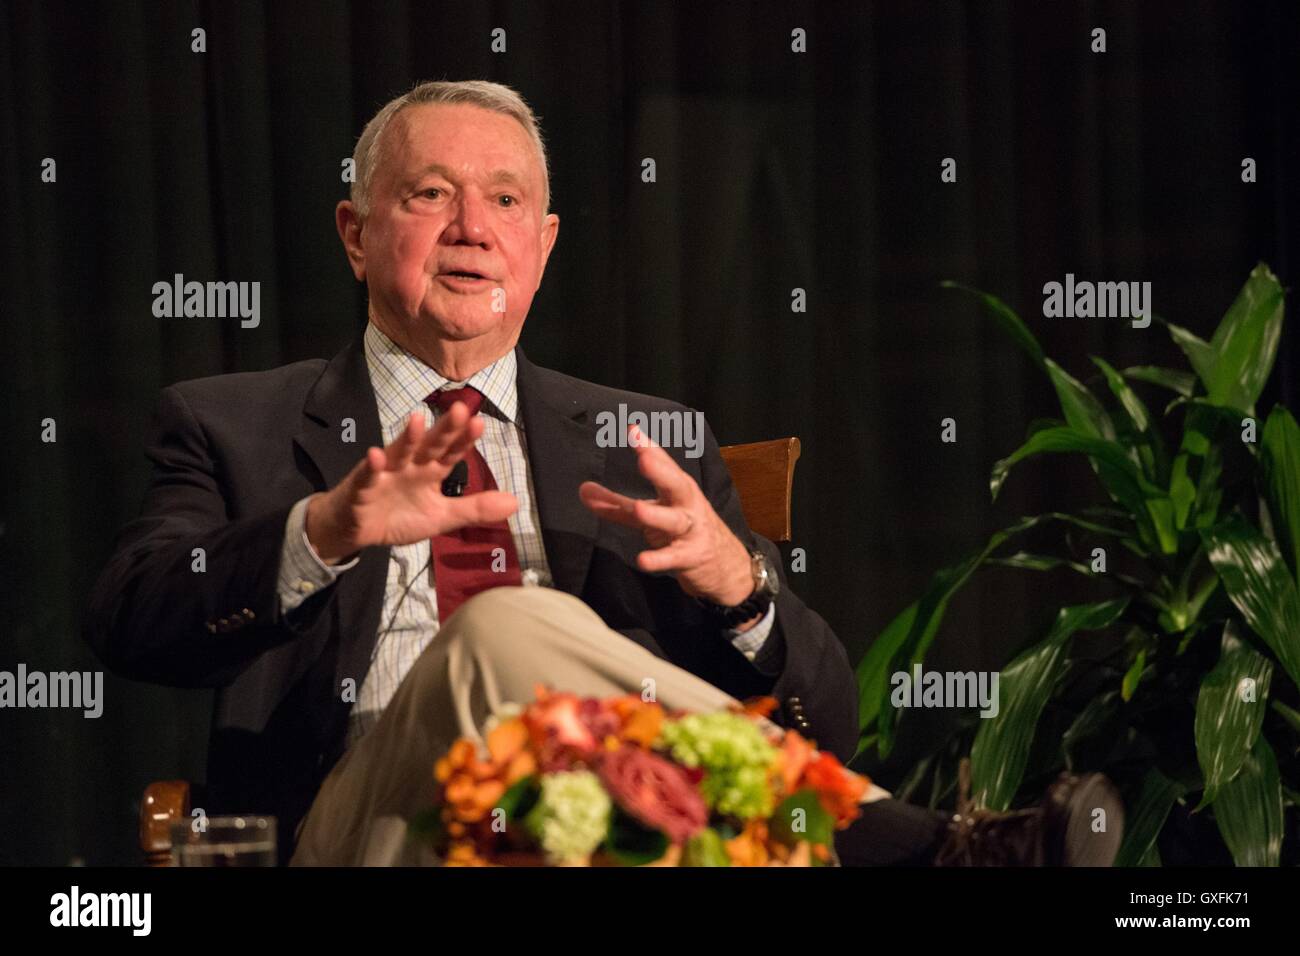 Austin Mayor Lee Leffingwell speaks about the new city council electoral process during a discussion at the LBJ Presidential Library October 7, 2014 in Austin, Texas. Stock Photo